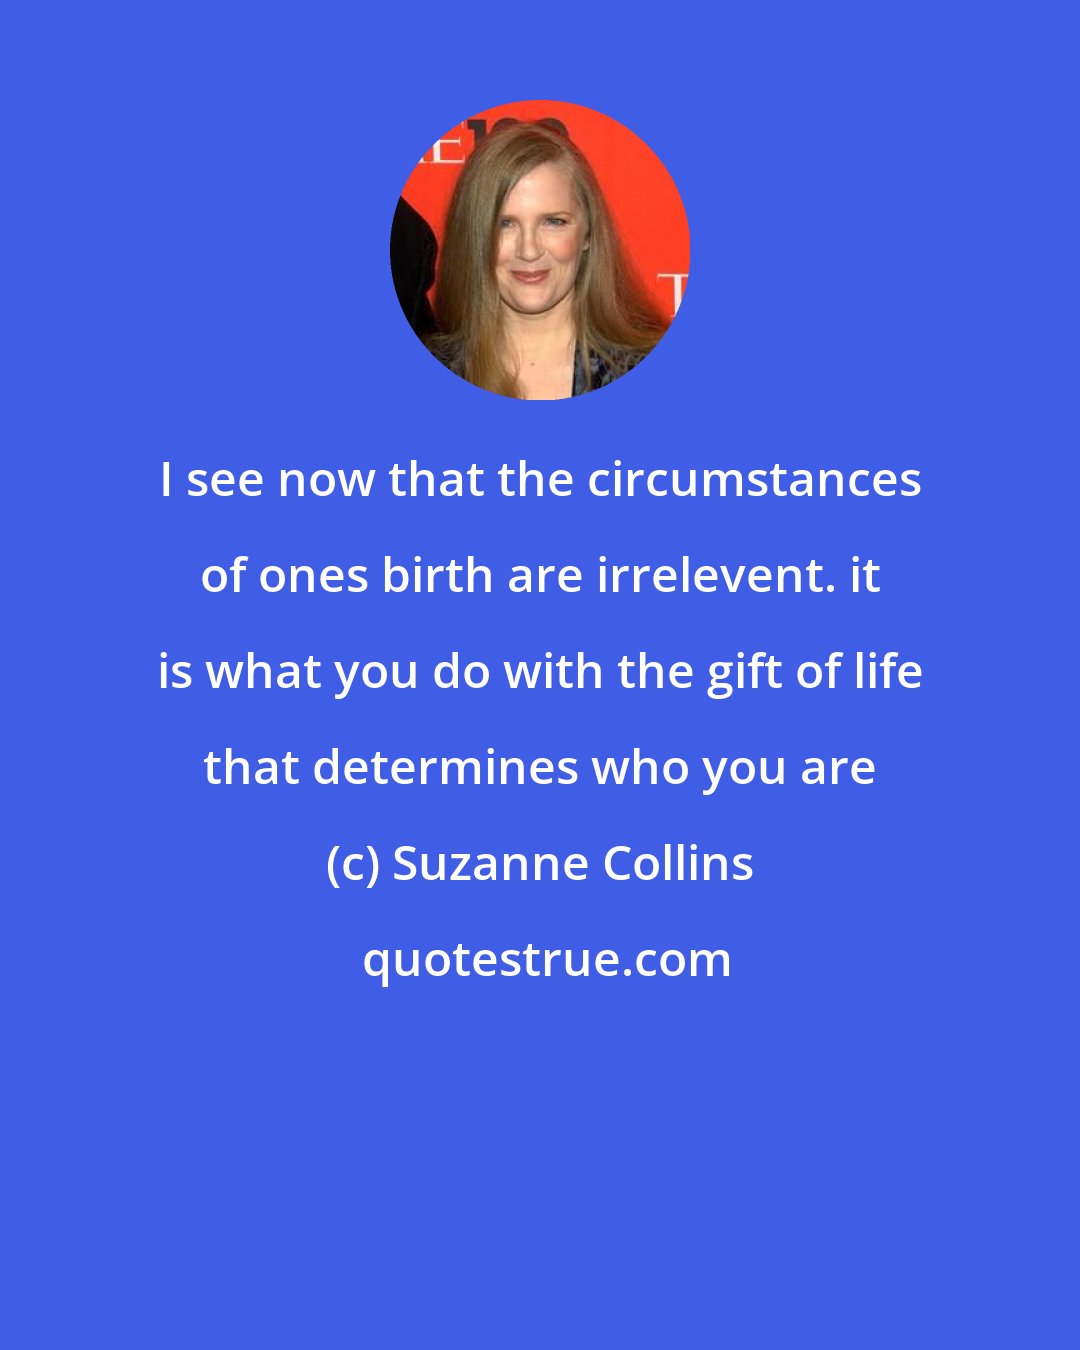 Suzanne Collins: I see now that the circumstances of ones birth are irrelevent. it is what you do with the gift of life that determines who you are